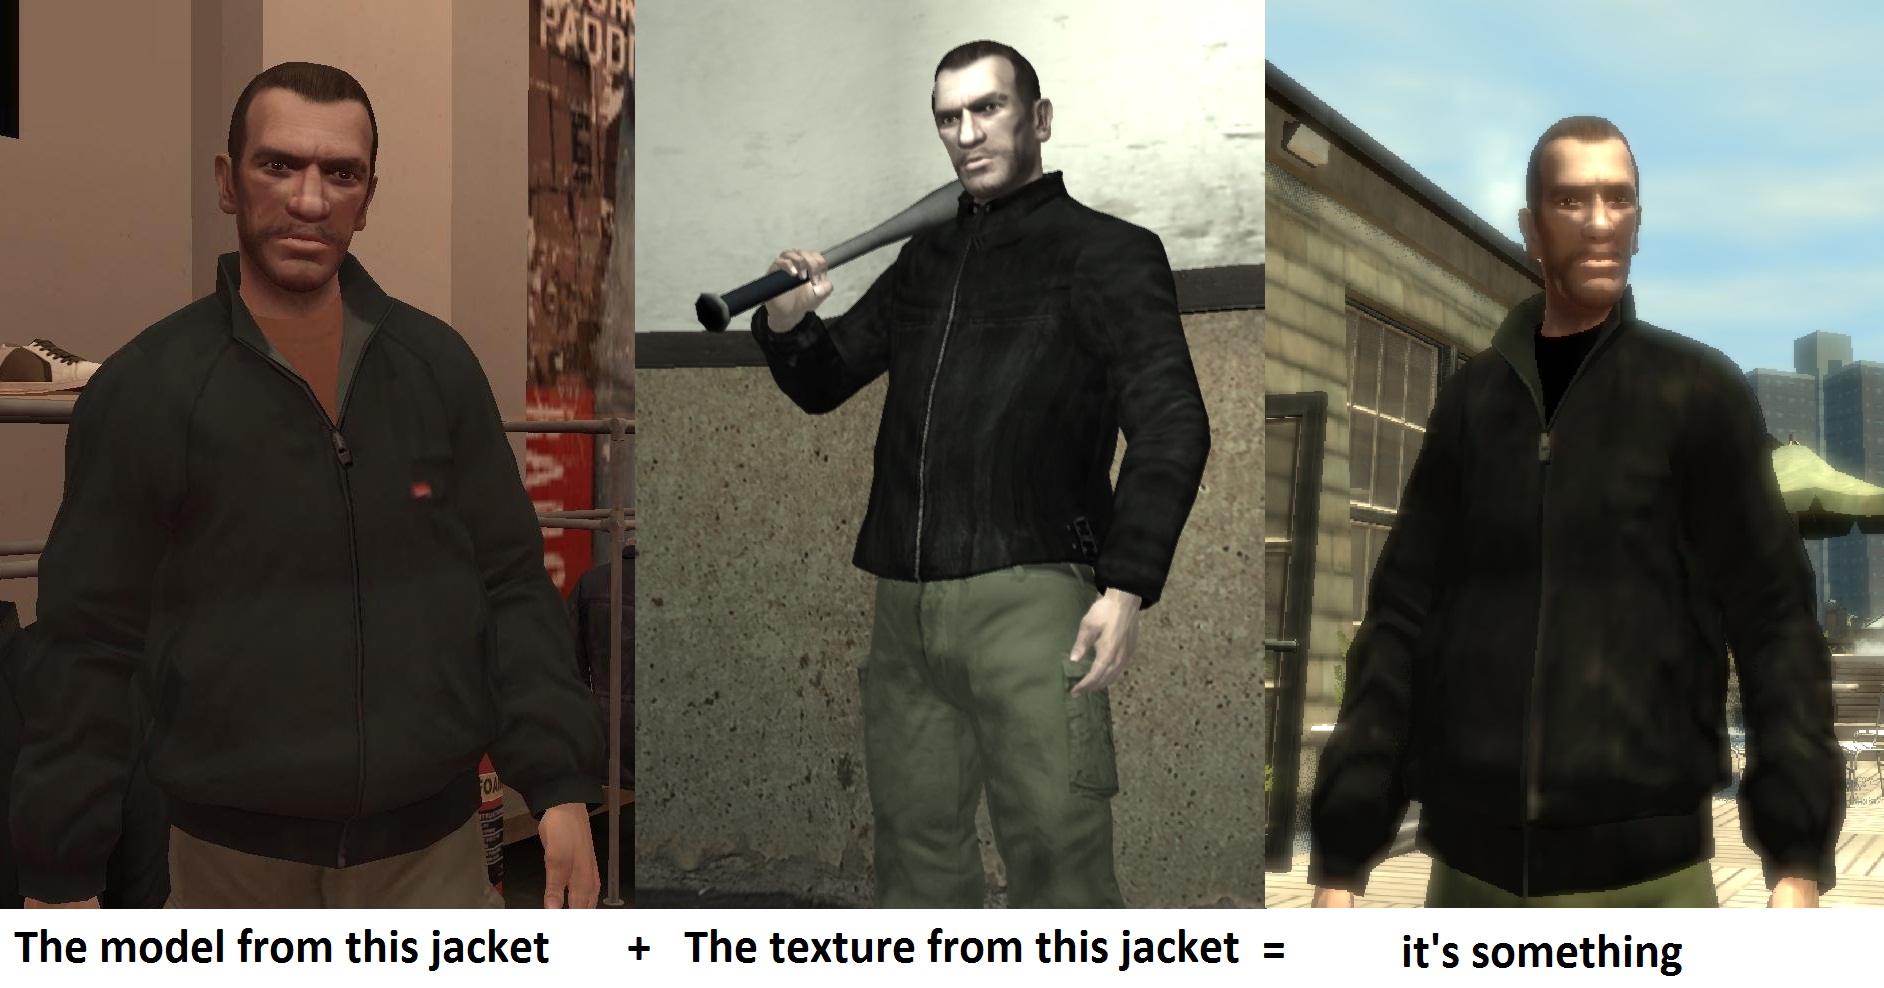 in GTA IV, you can find GTA III protagonist Claude's outfit in Playboy X's  penthouse. : r/GamingDetails